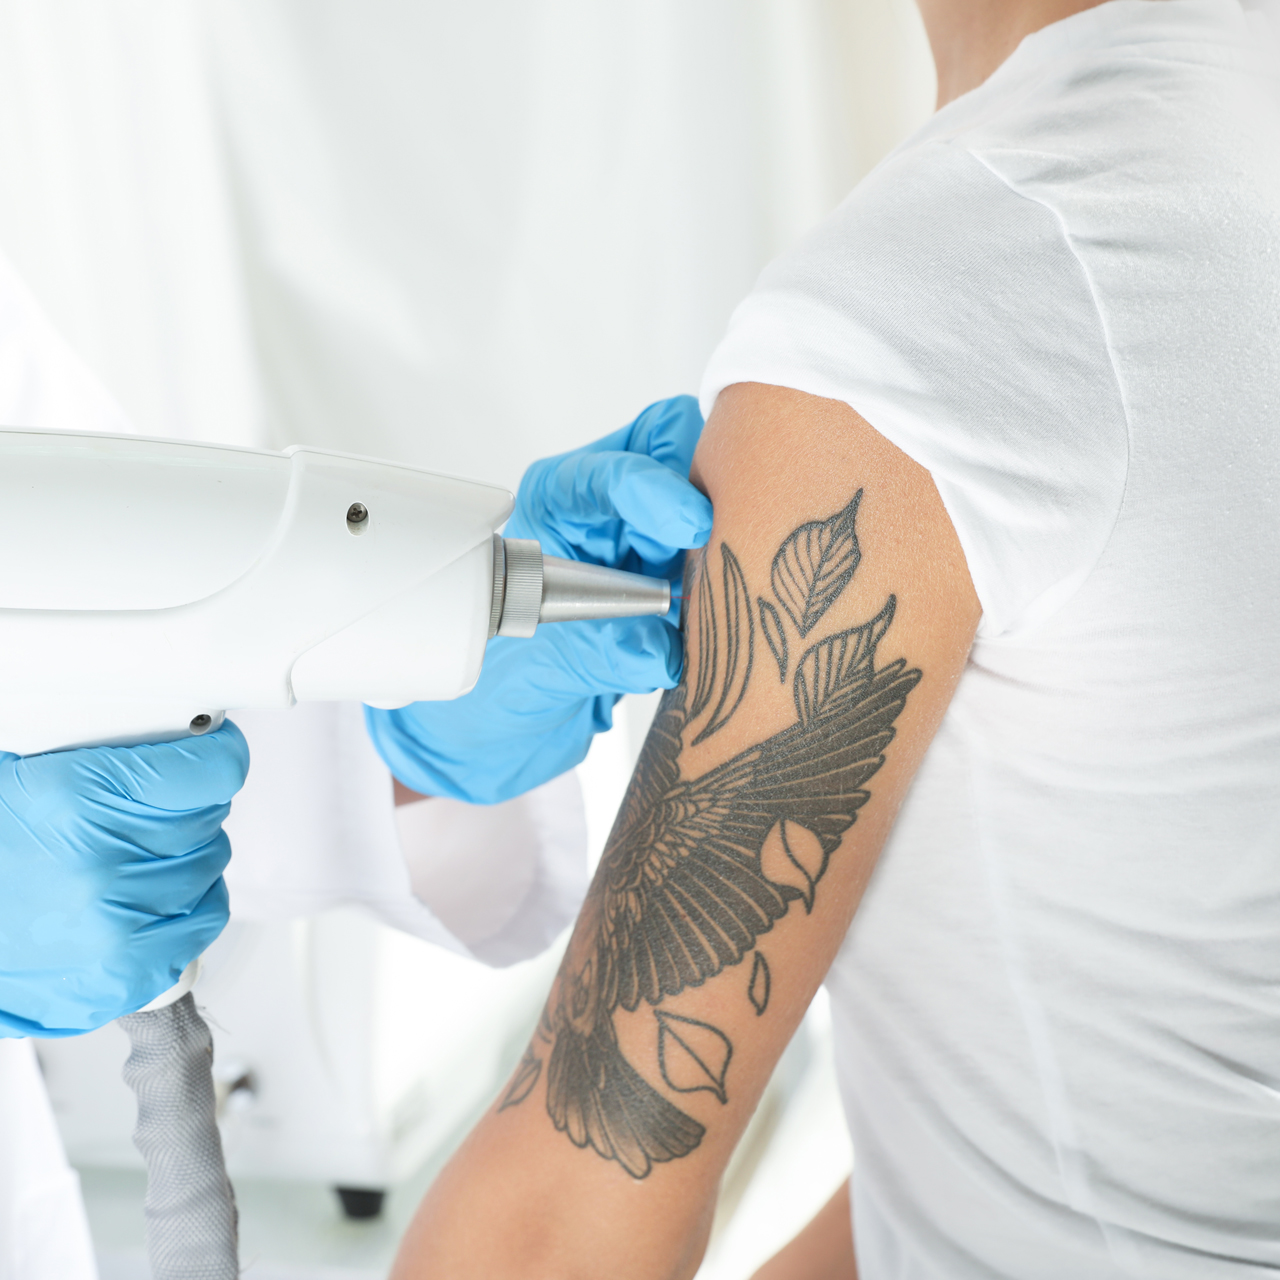 Tattoo Removal Sydney  Laser Removal Treatment  Contour Clinics